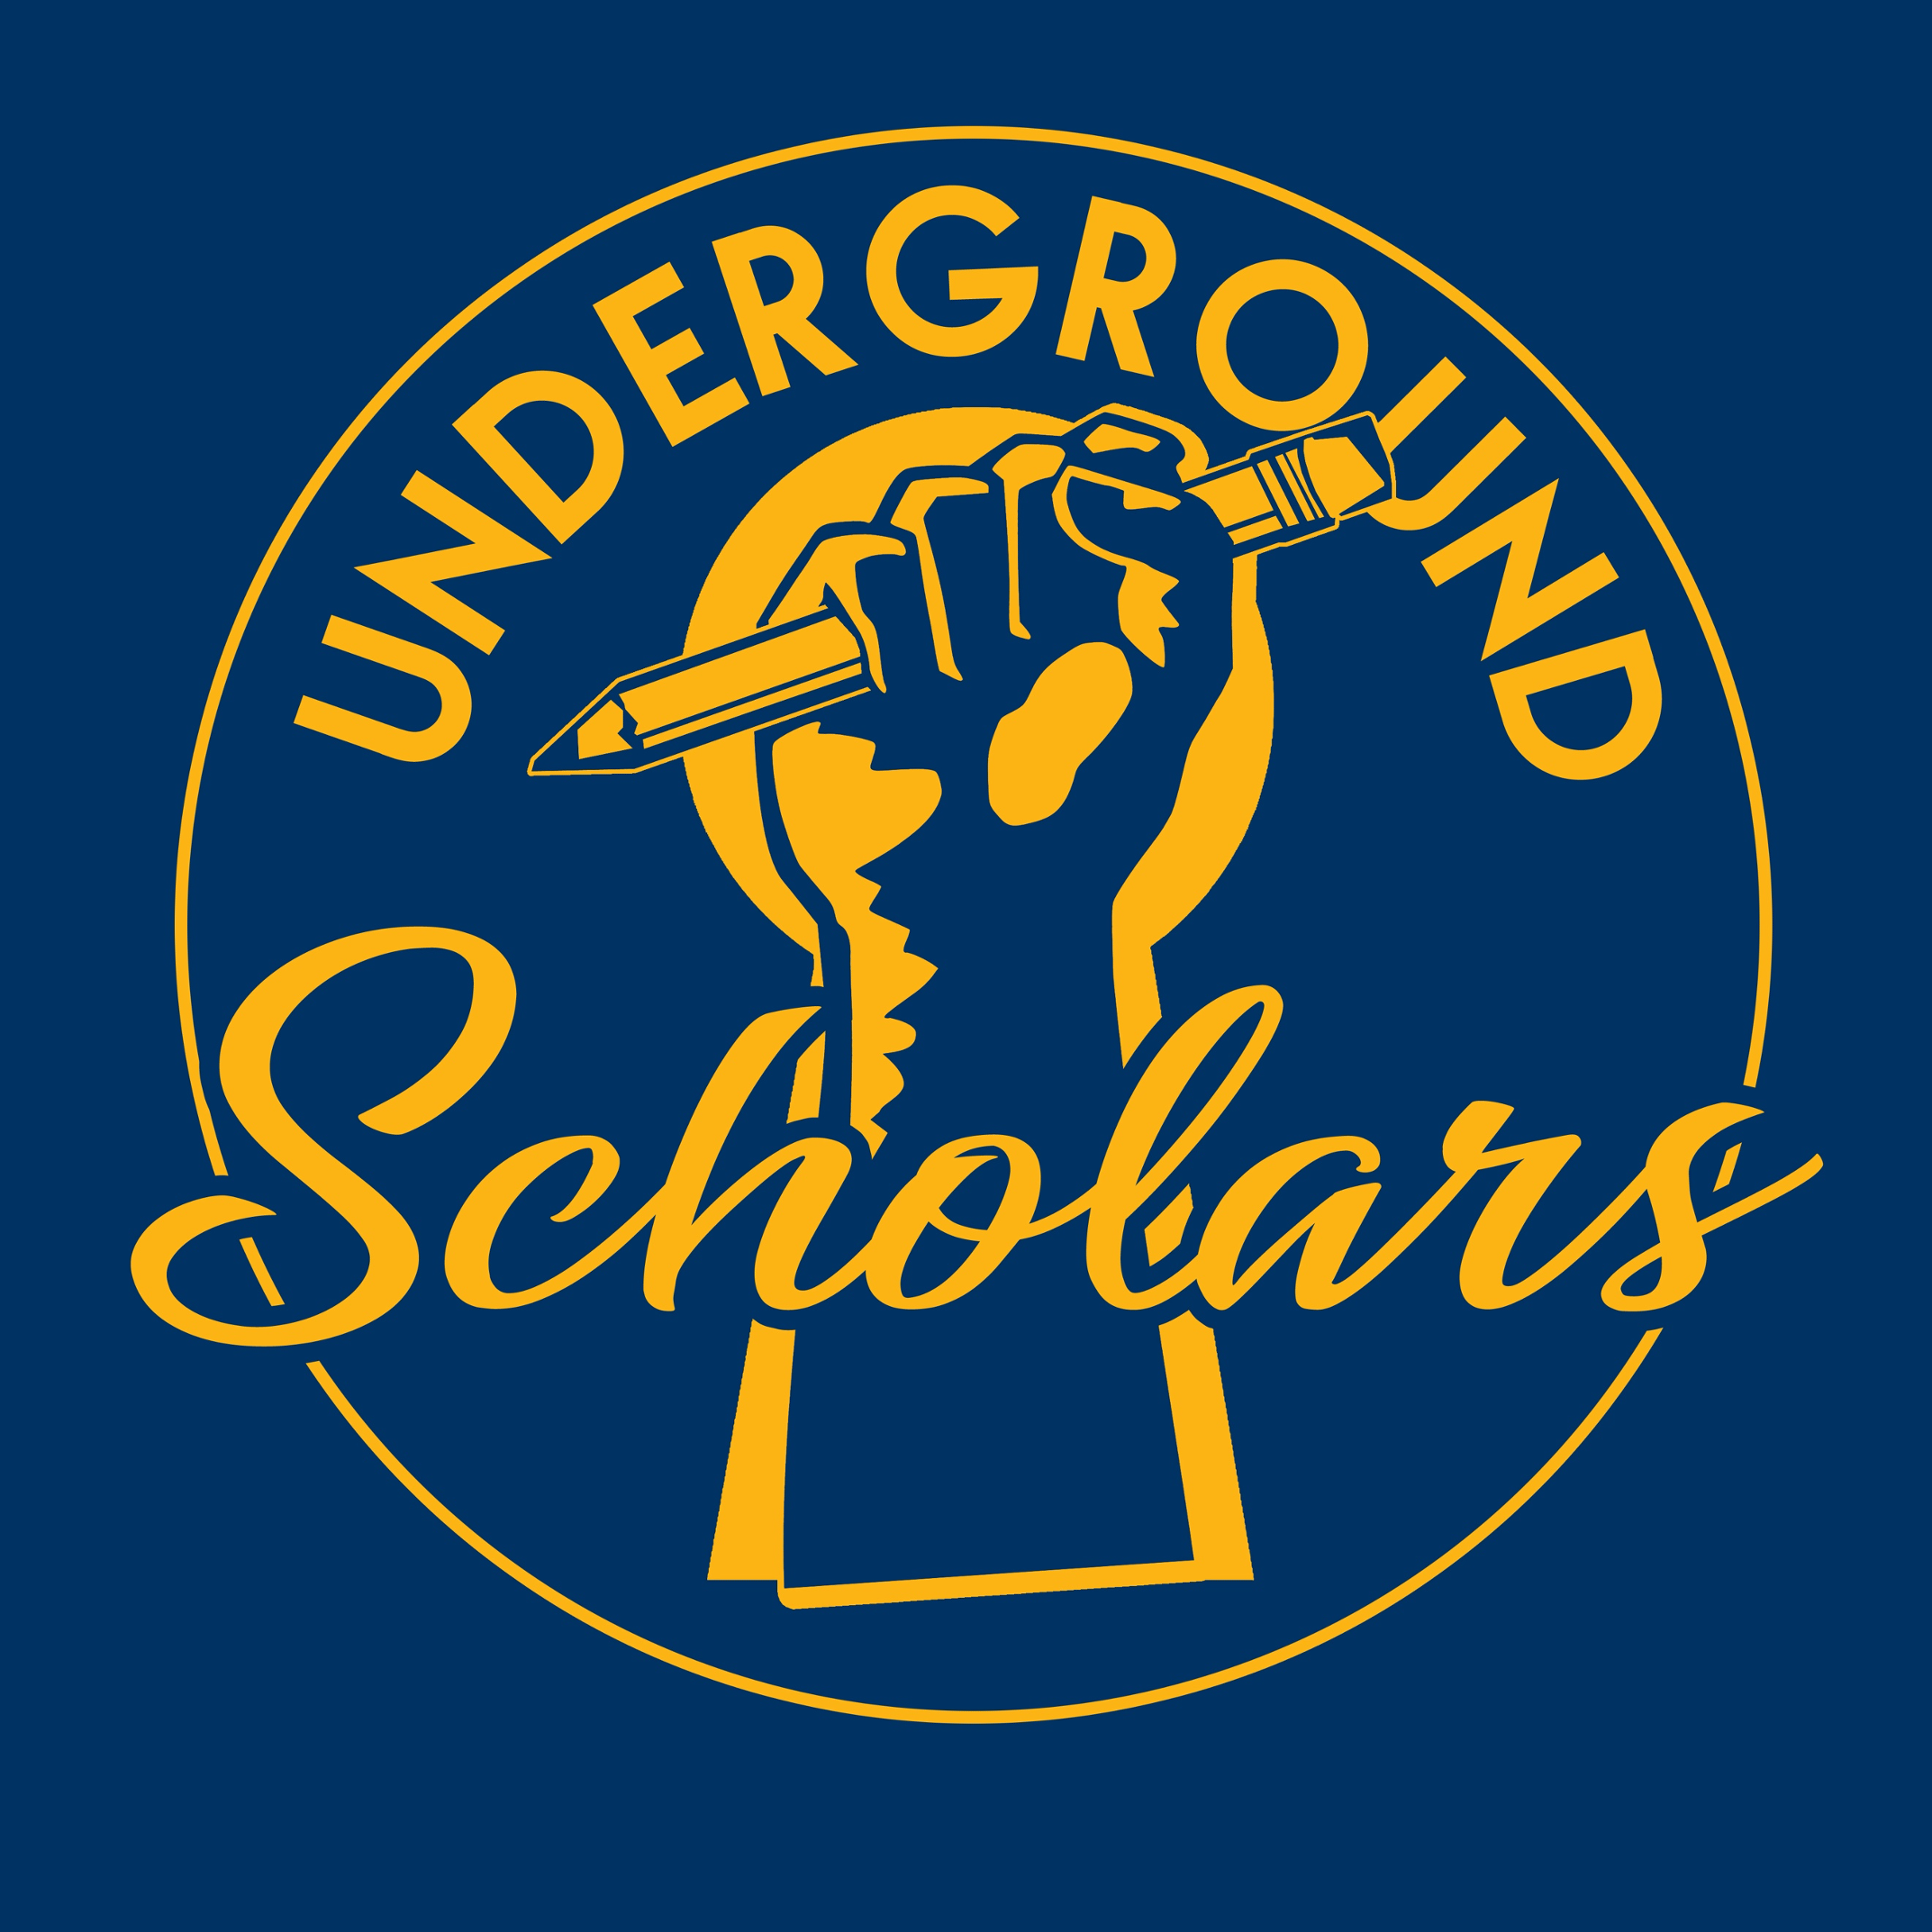 UCR UCI Logo - fit w/ pencil and underground scholars text